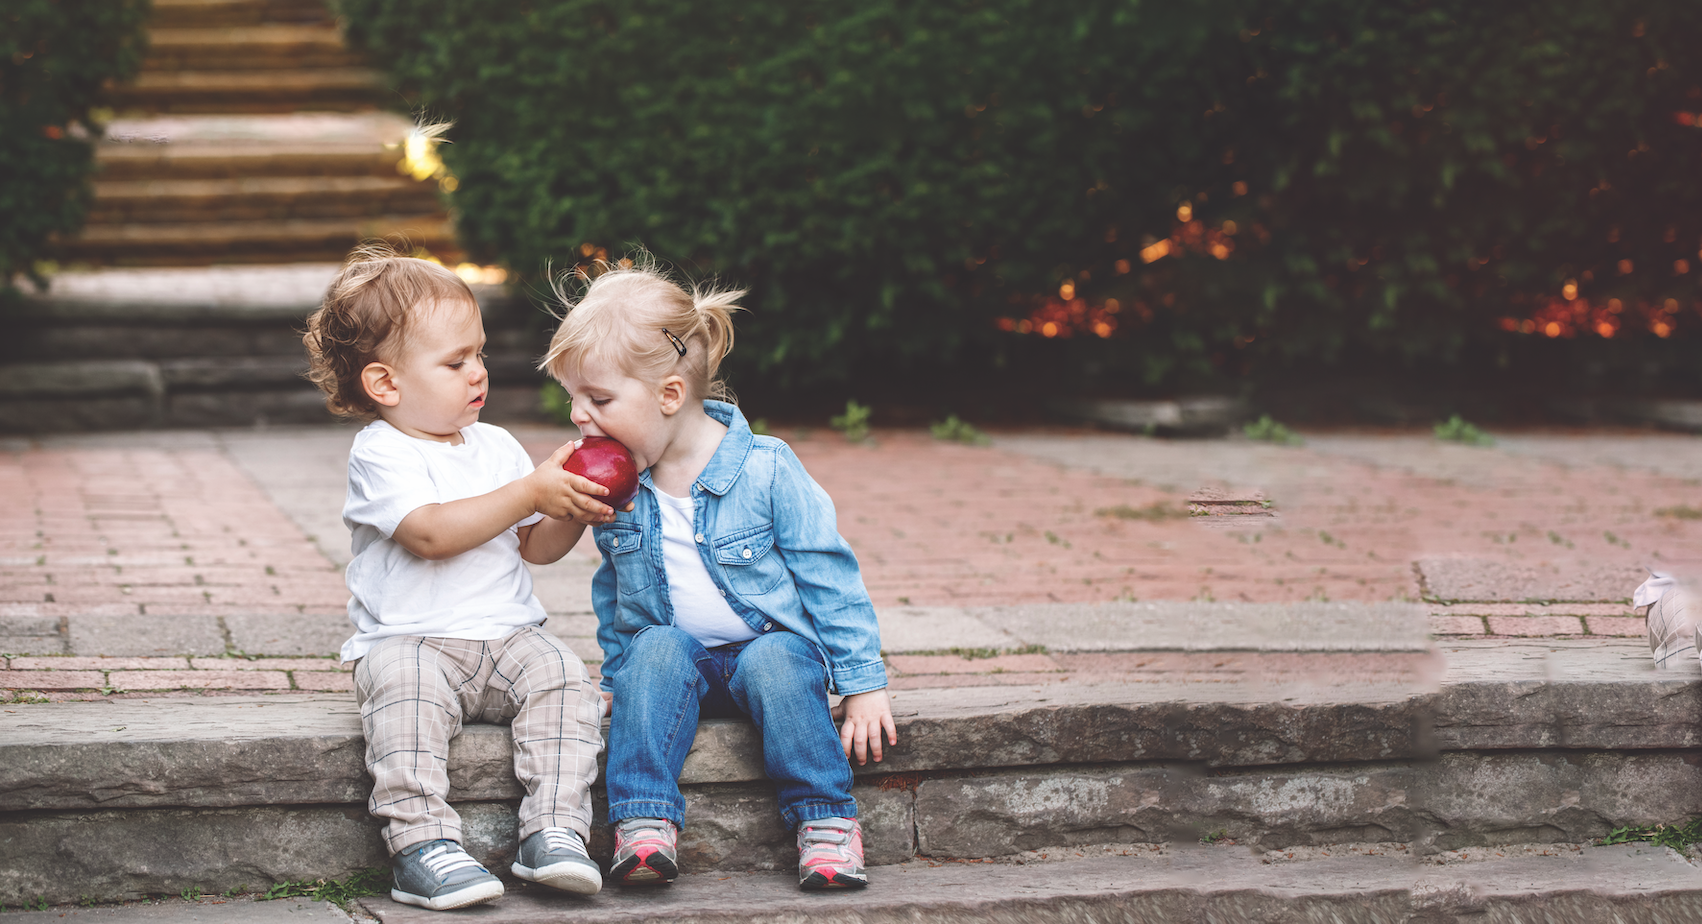 young boy and girl sit outside on a step and boy holds up apple while girl takes a bite